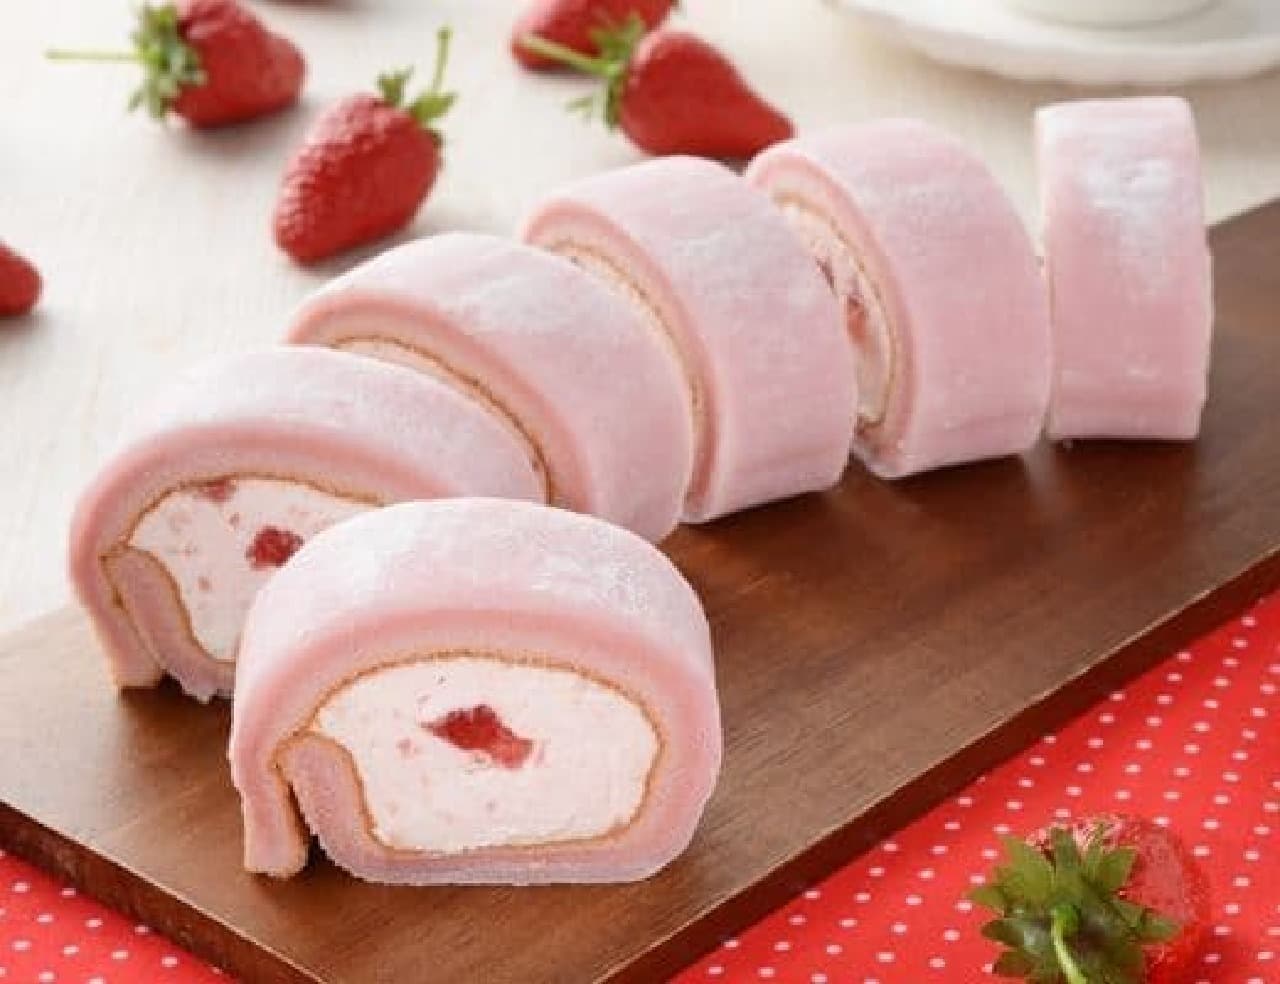 Lawson "Strawberry milk roll with mochi-wrapped texture"